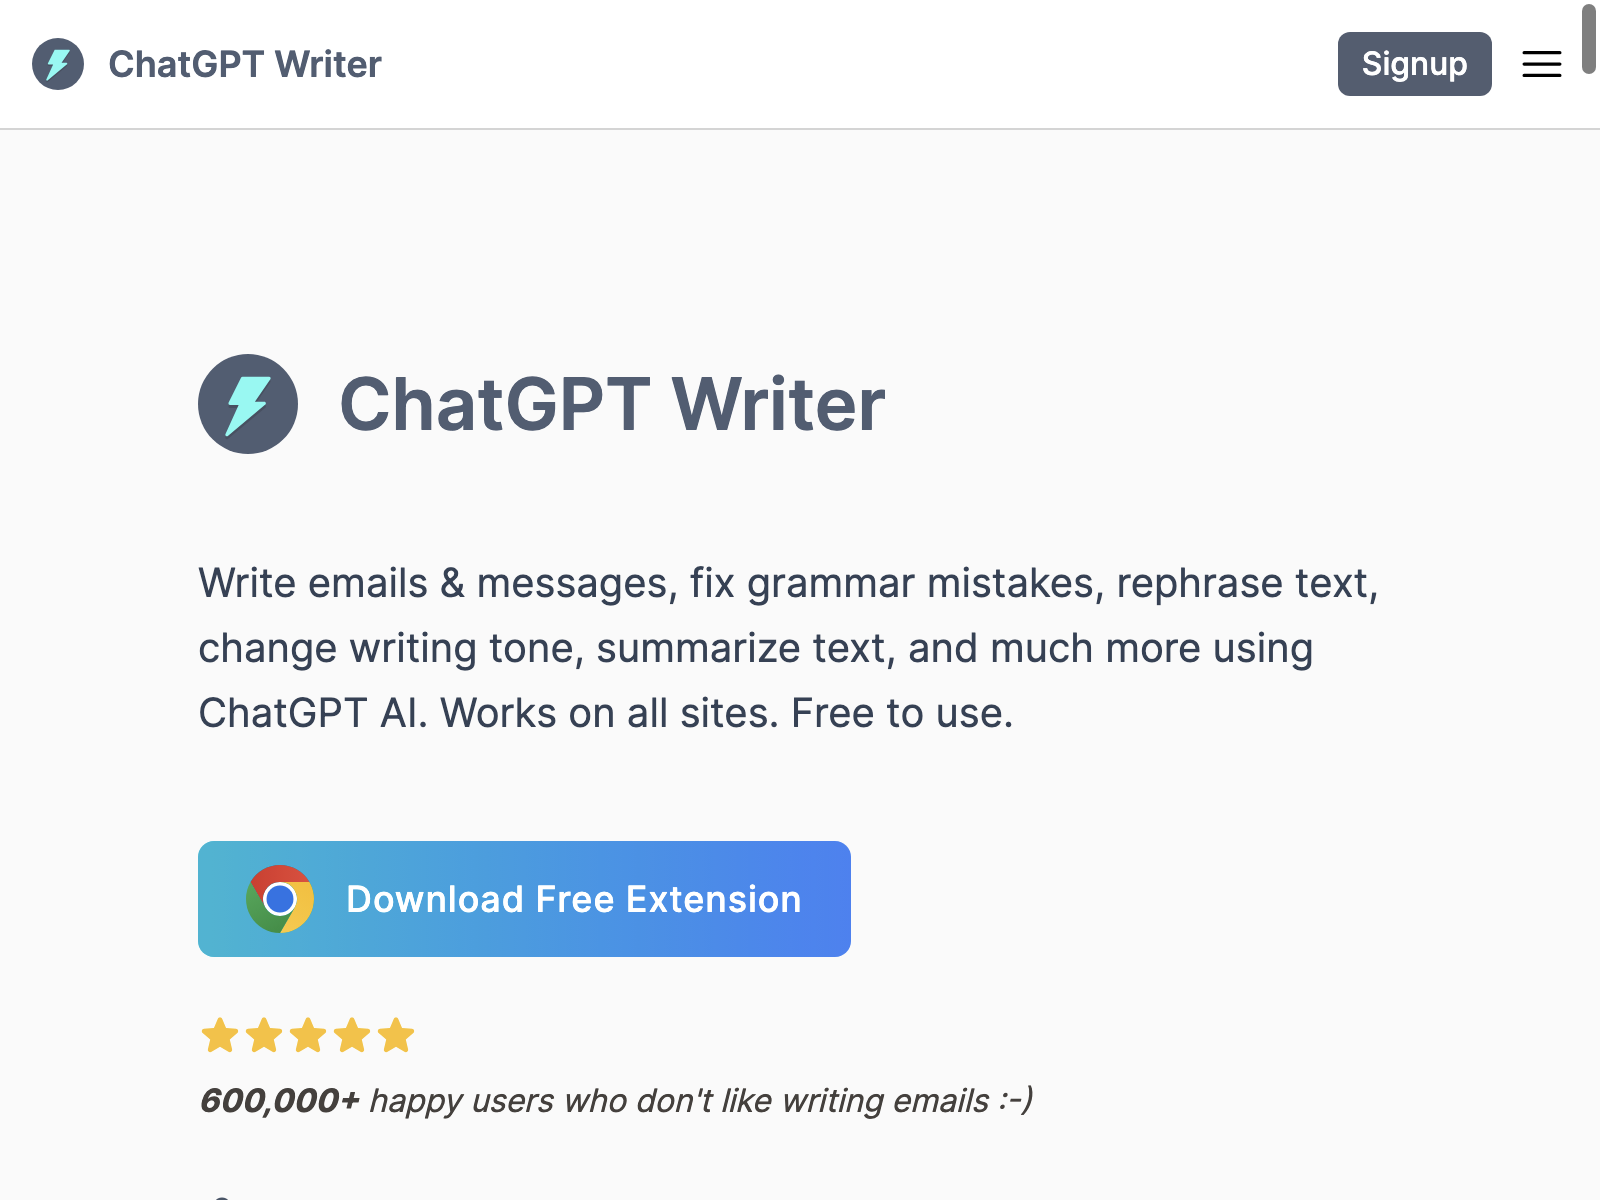 chatgpt writer Review: Pros, Cons, Alternatives